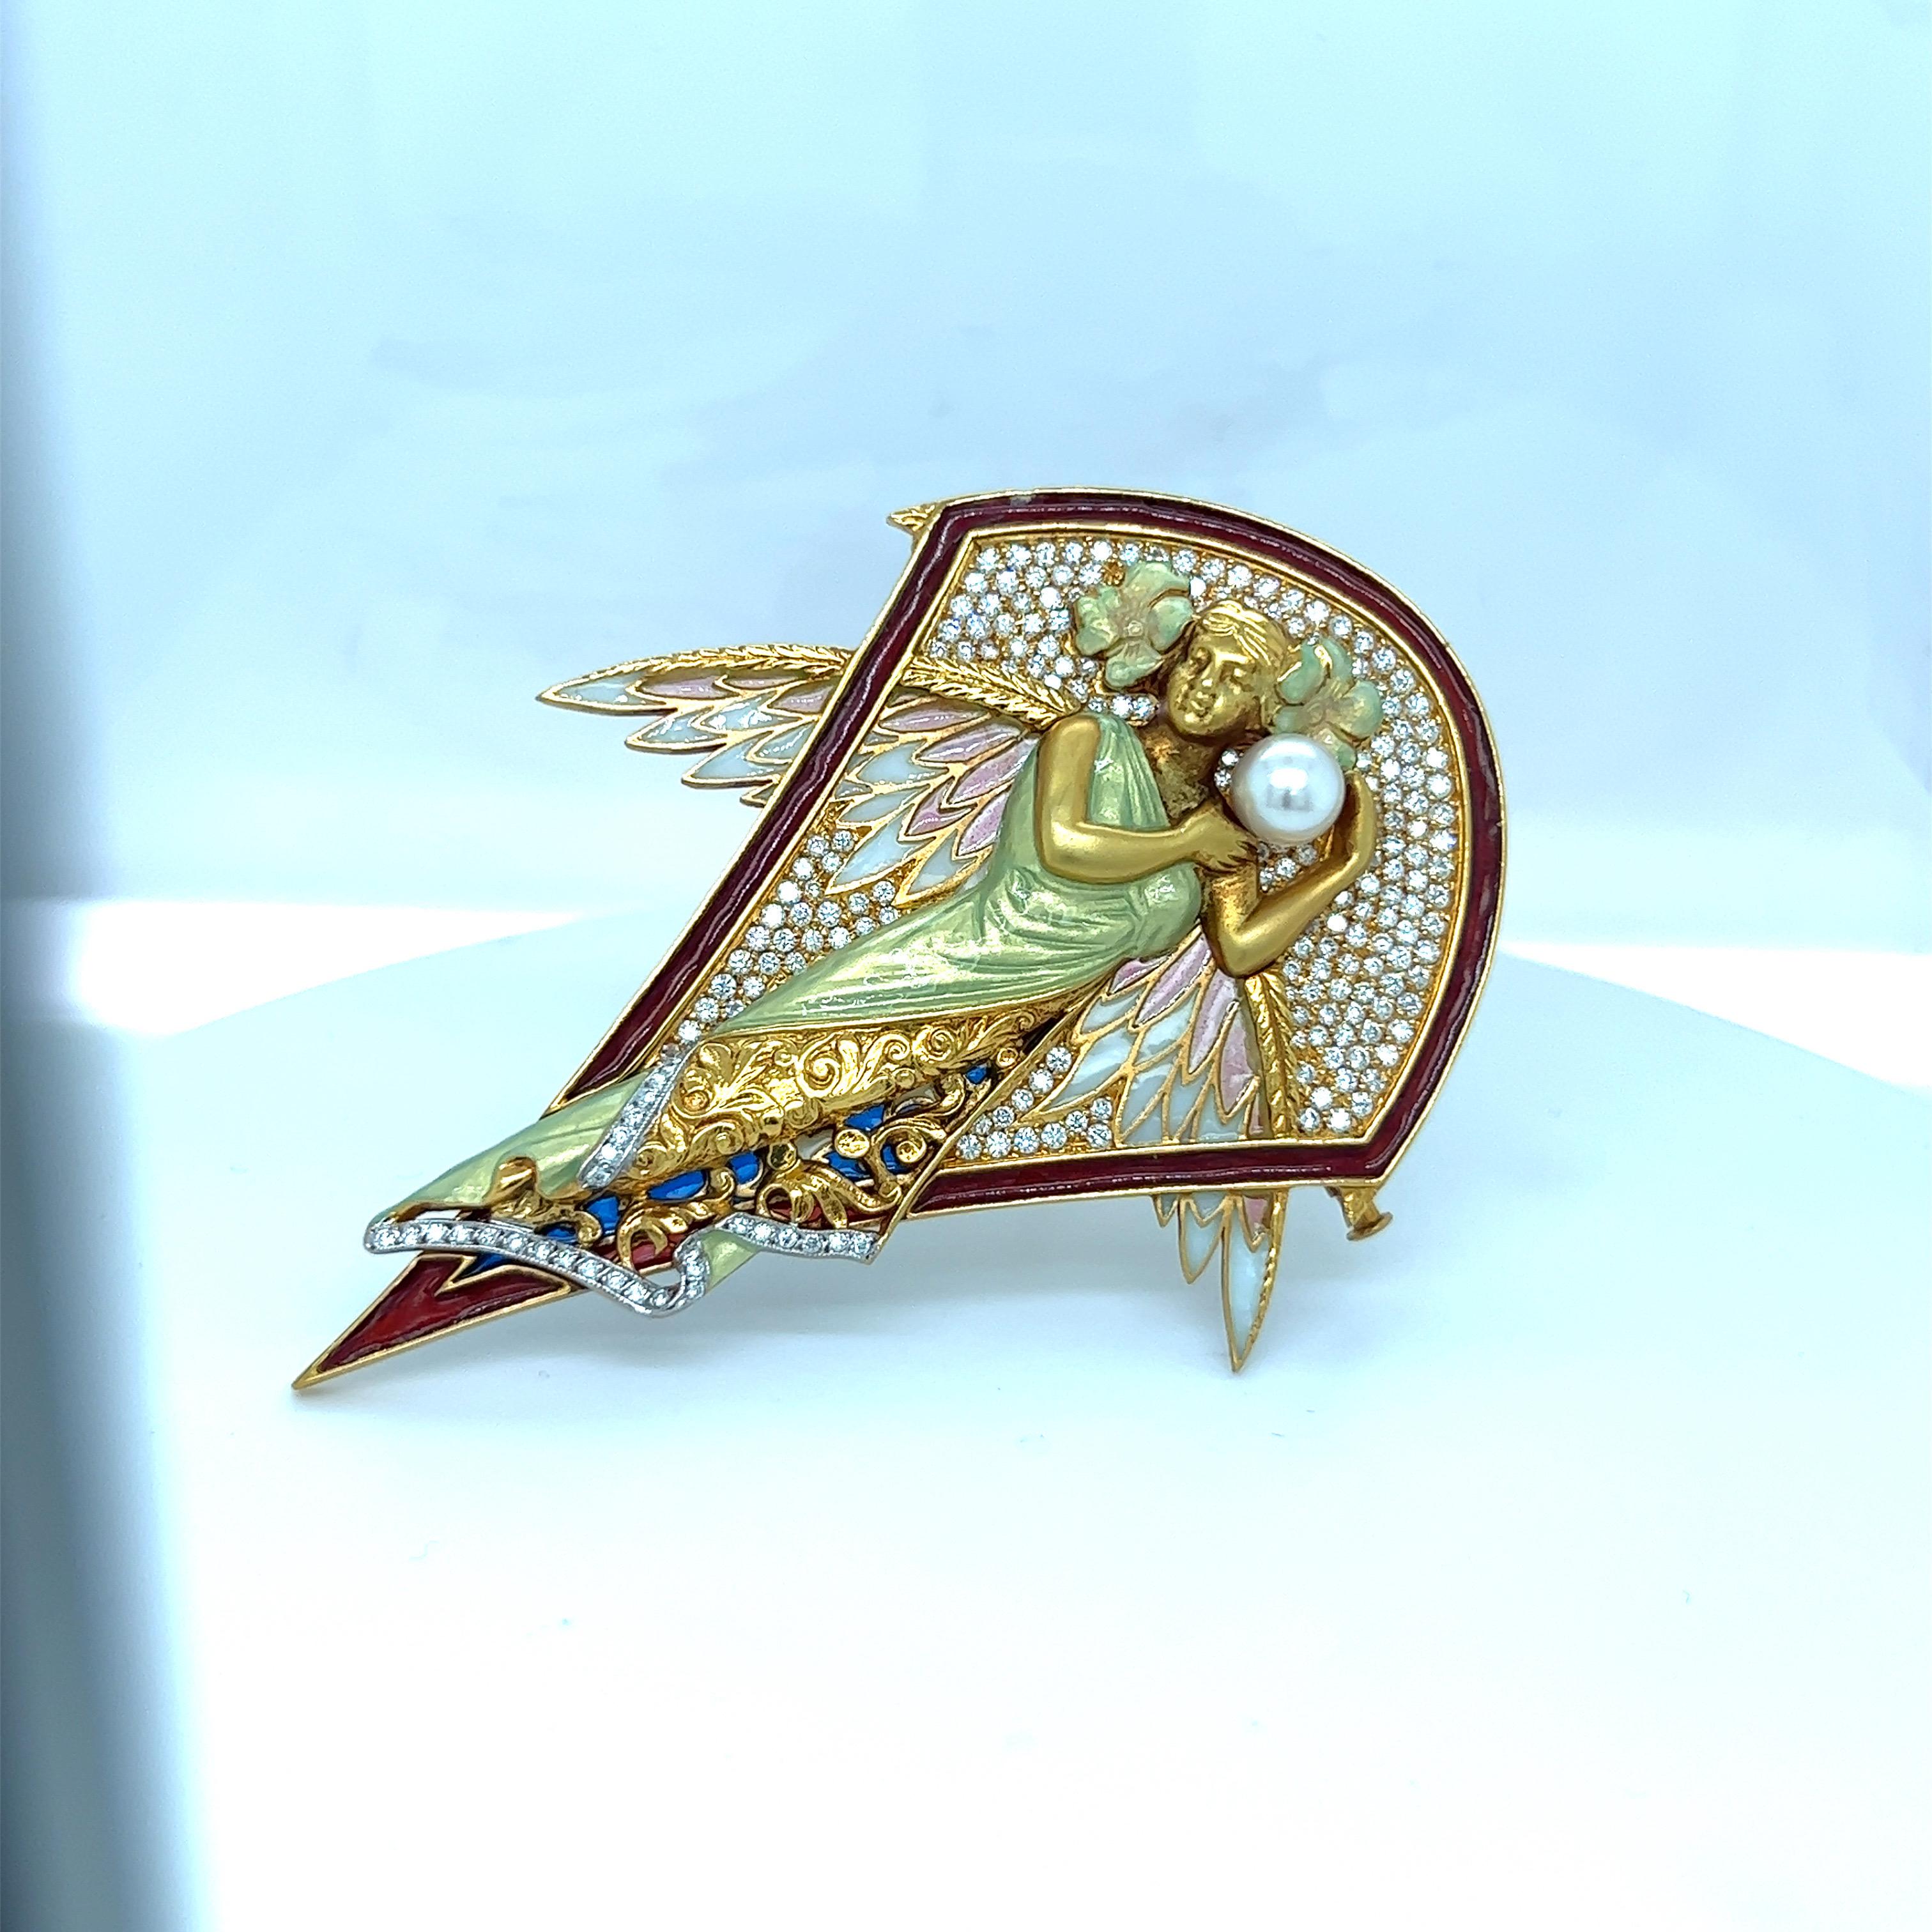 Women's or Men's Masriera 18 KT YG Winged Nymph Brooch with Dia 1.94CT, Enamel and Pearls For Sale